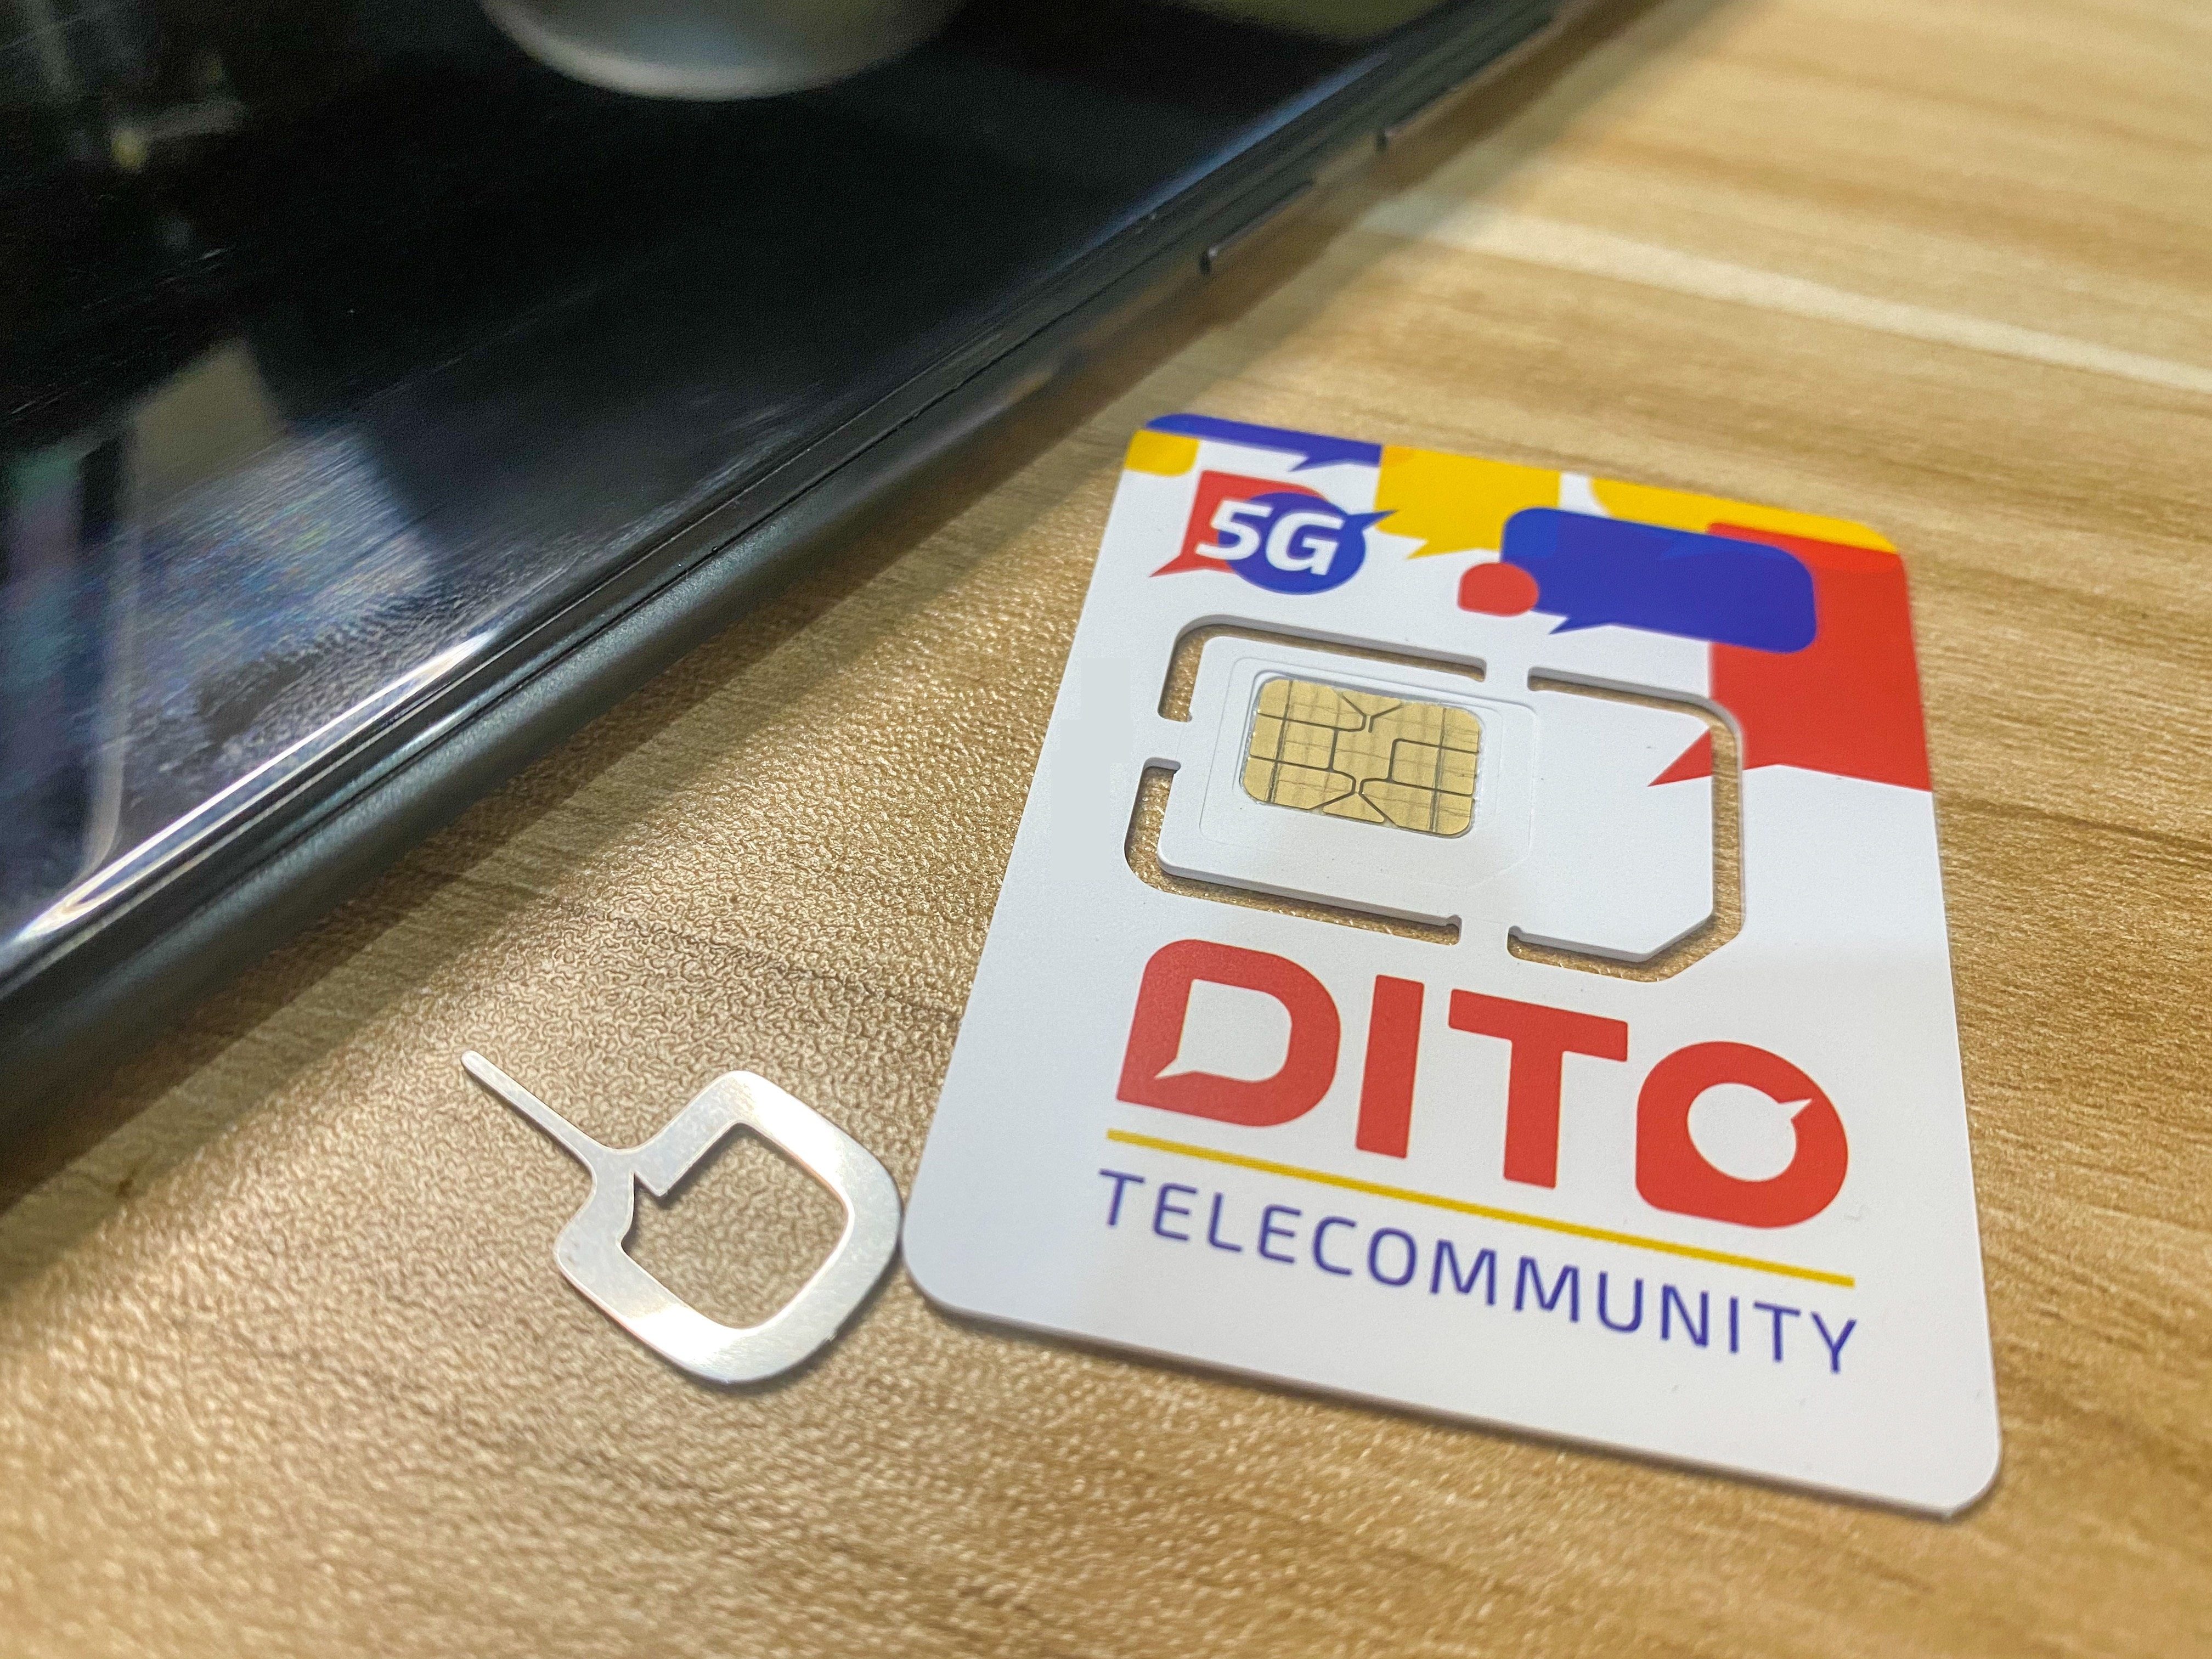 Dito Telecommunity expands to 17 more areas